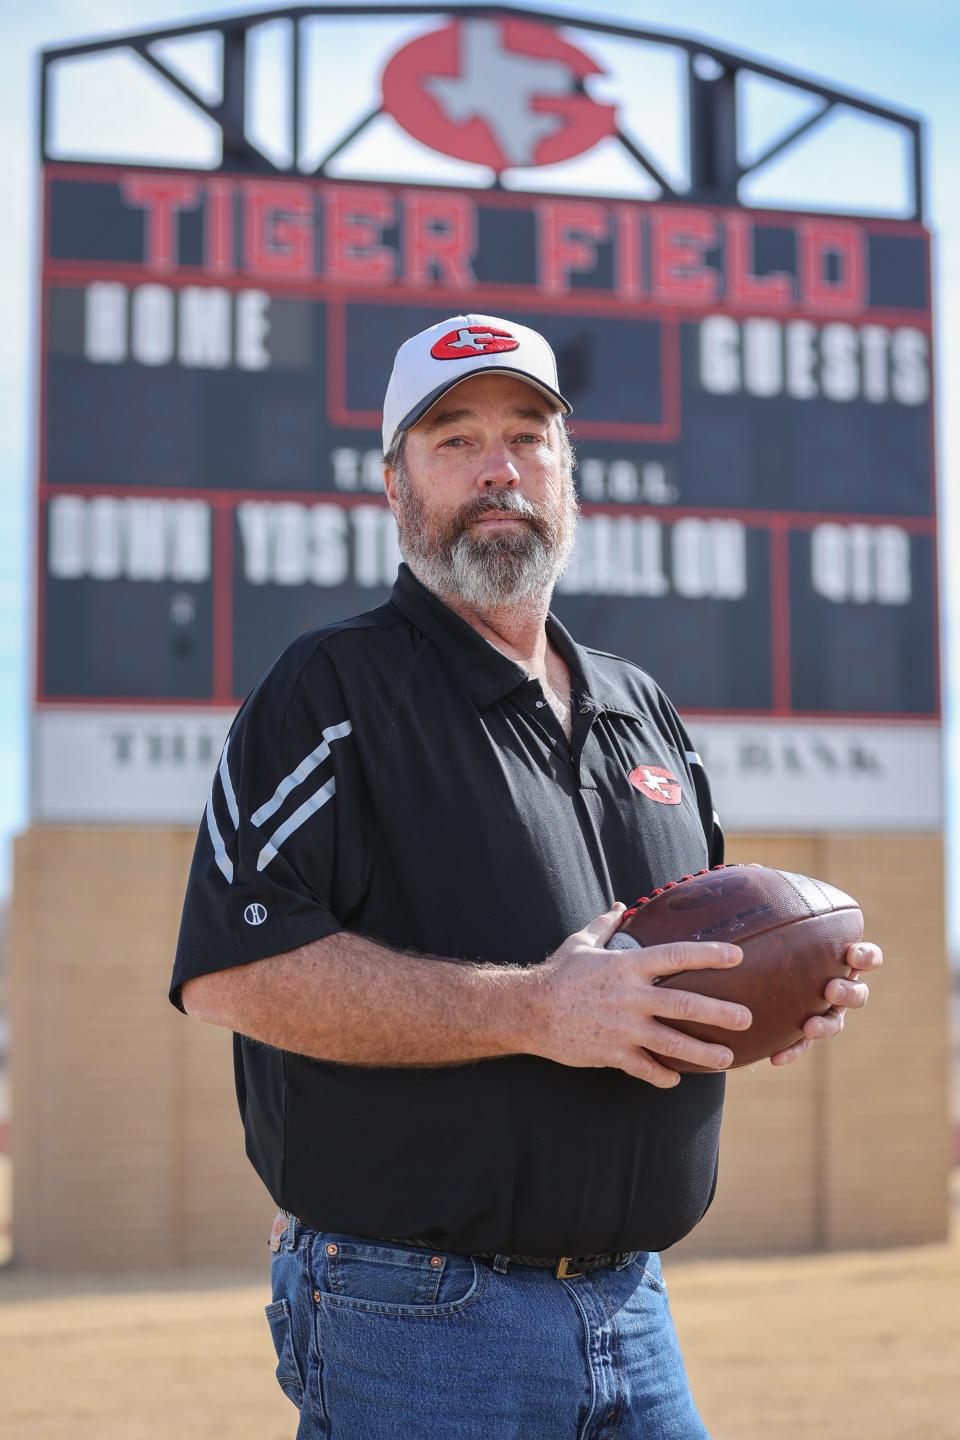 Groom’s Tory Peet was named the Amarillo Globe-News Six-Man Coach of the Year. He’s posing Monday, Jan. 25, 2023 at Tiger Field in Groom, Texas.